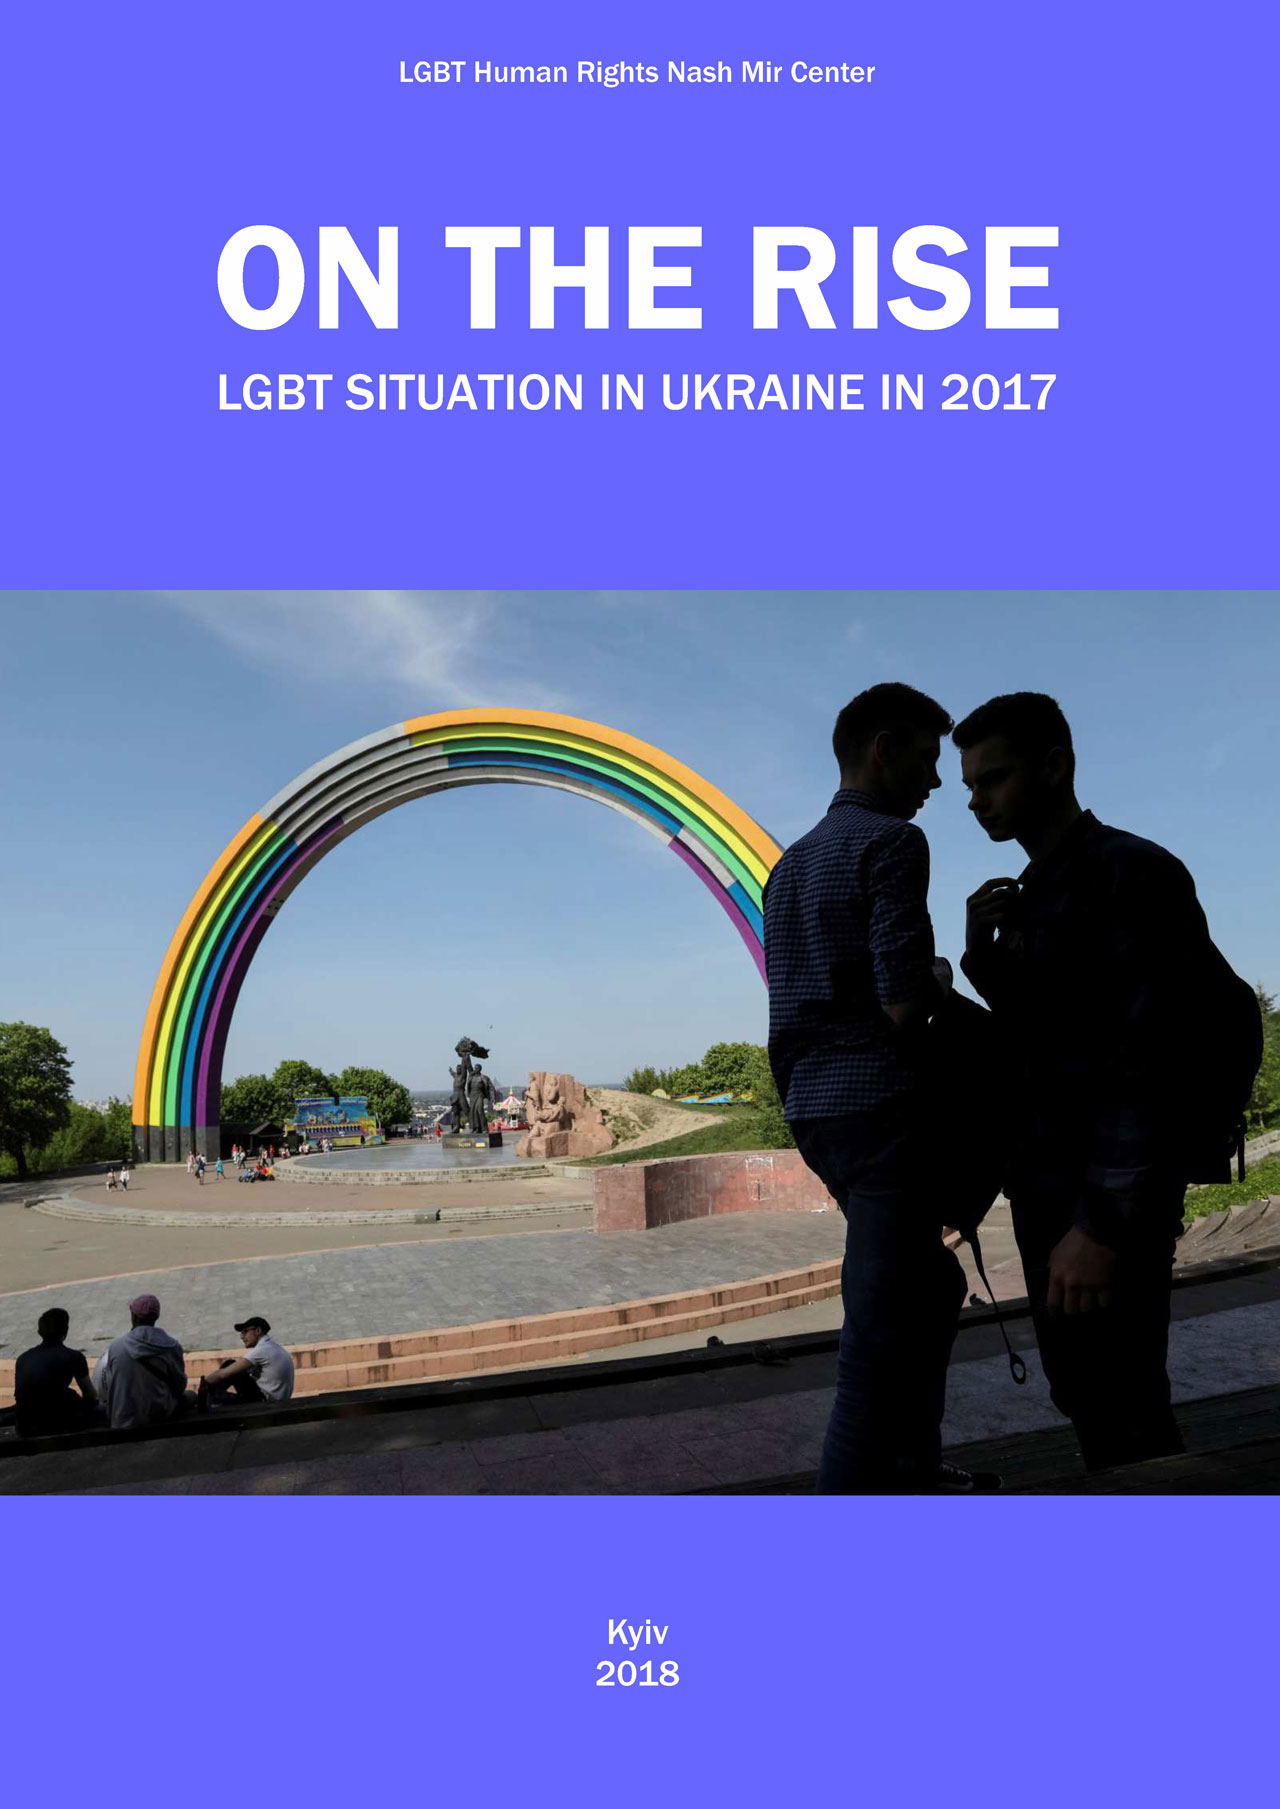 On the Rise. LGBT situation in Ukraine in 2017